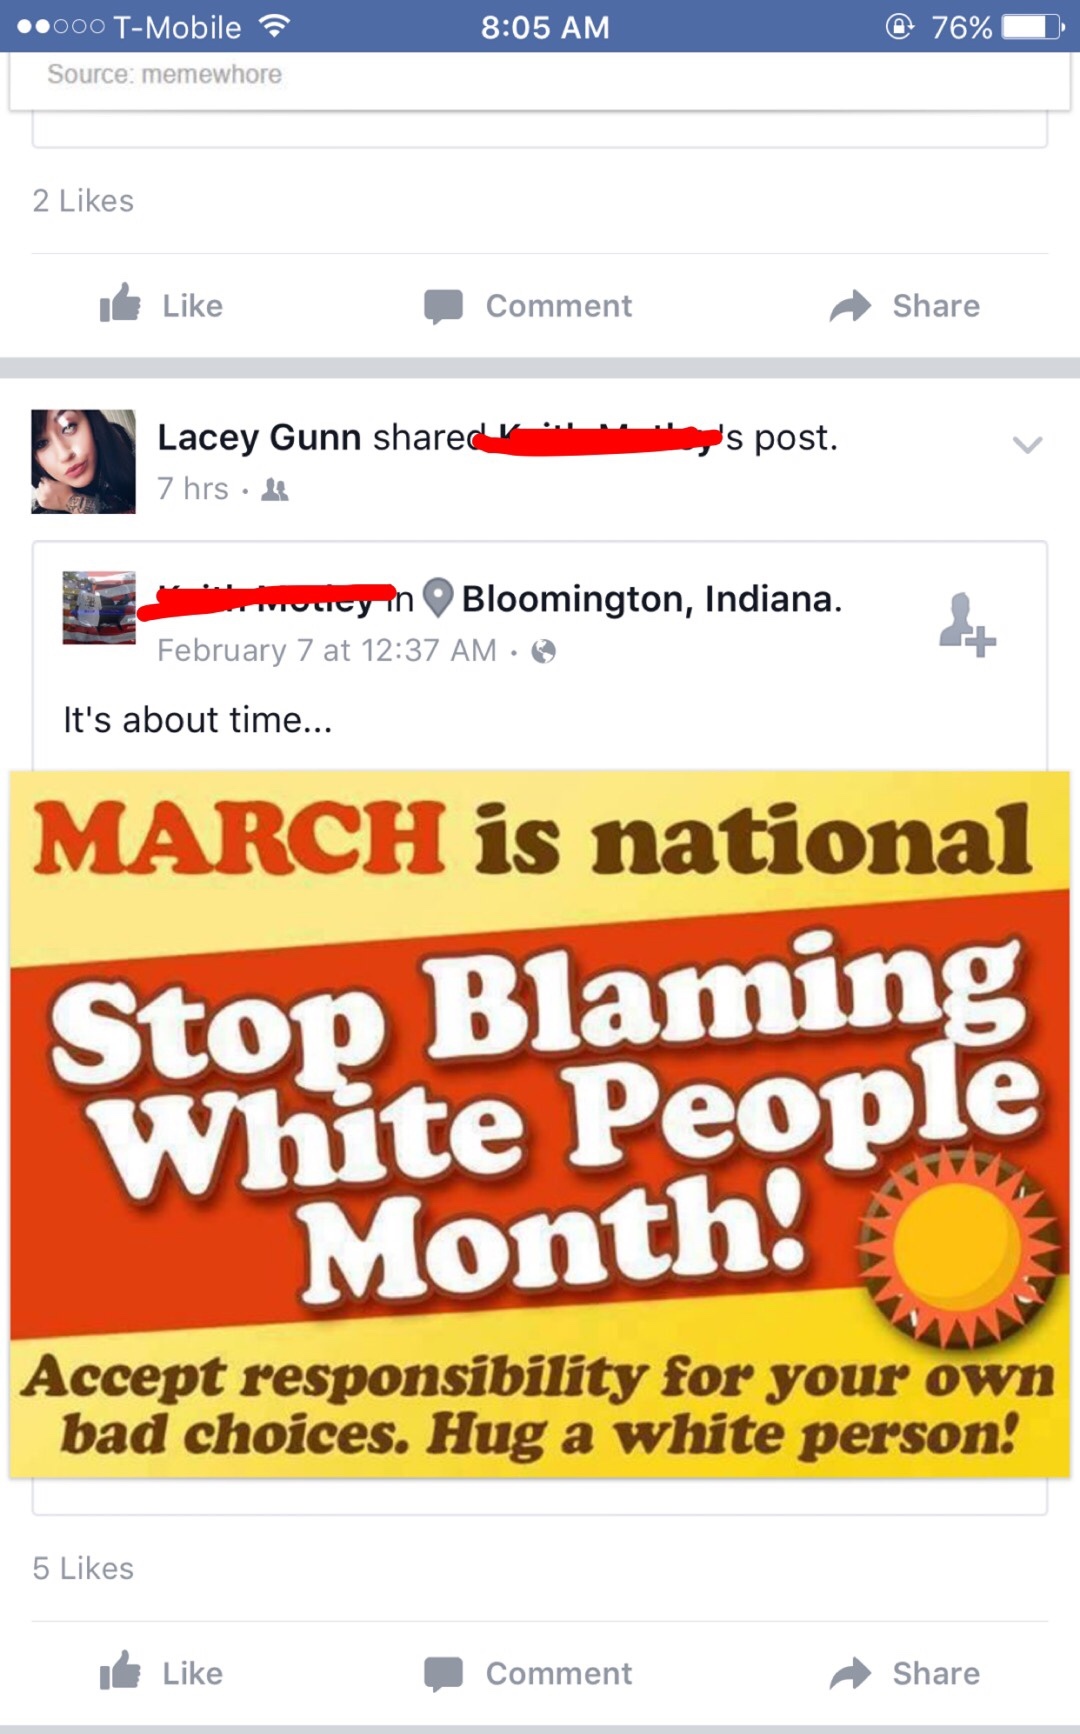 web page - 76% .000 TMobile Source memewhore 2 I Comment s post. Lacey Gunn d 7 hrs vacy In Bloomington, Indiana. February 7 at It's about time... March is national Stop Blaming White People Month! Accept responsibility for your own bad choices. Hug a whi